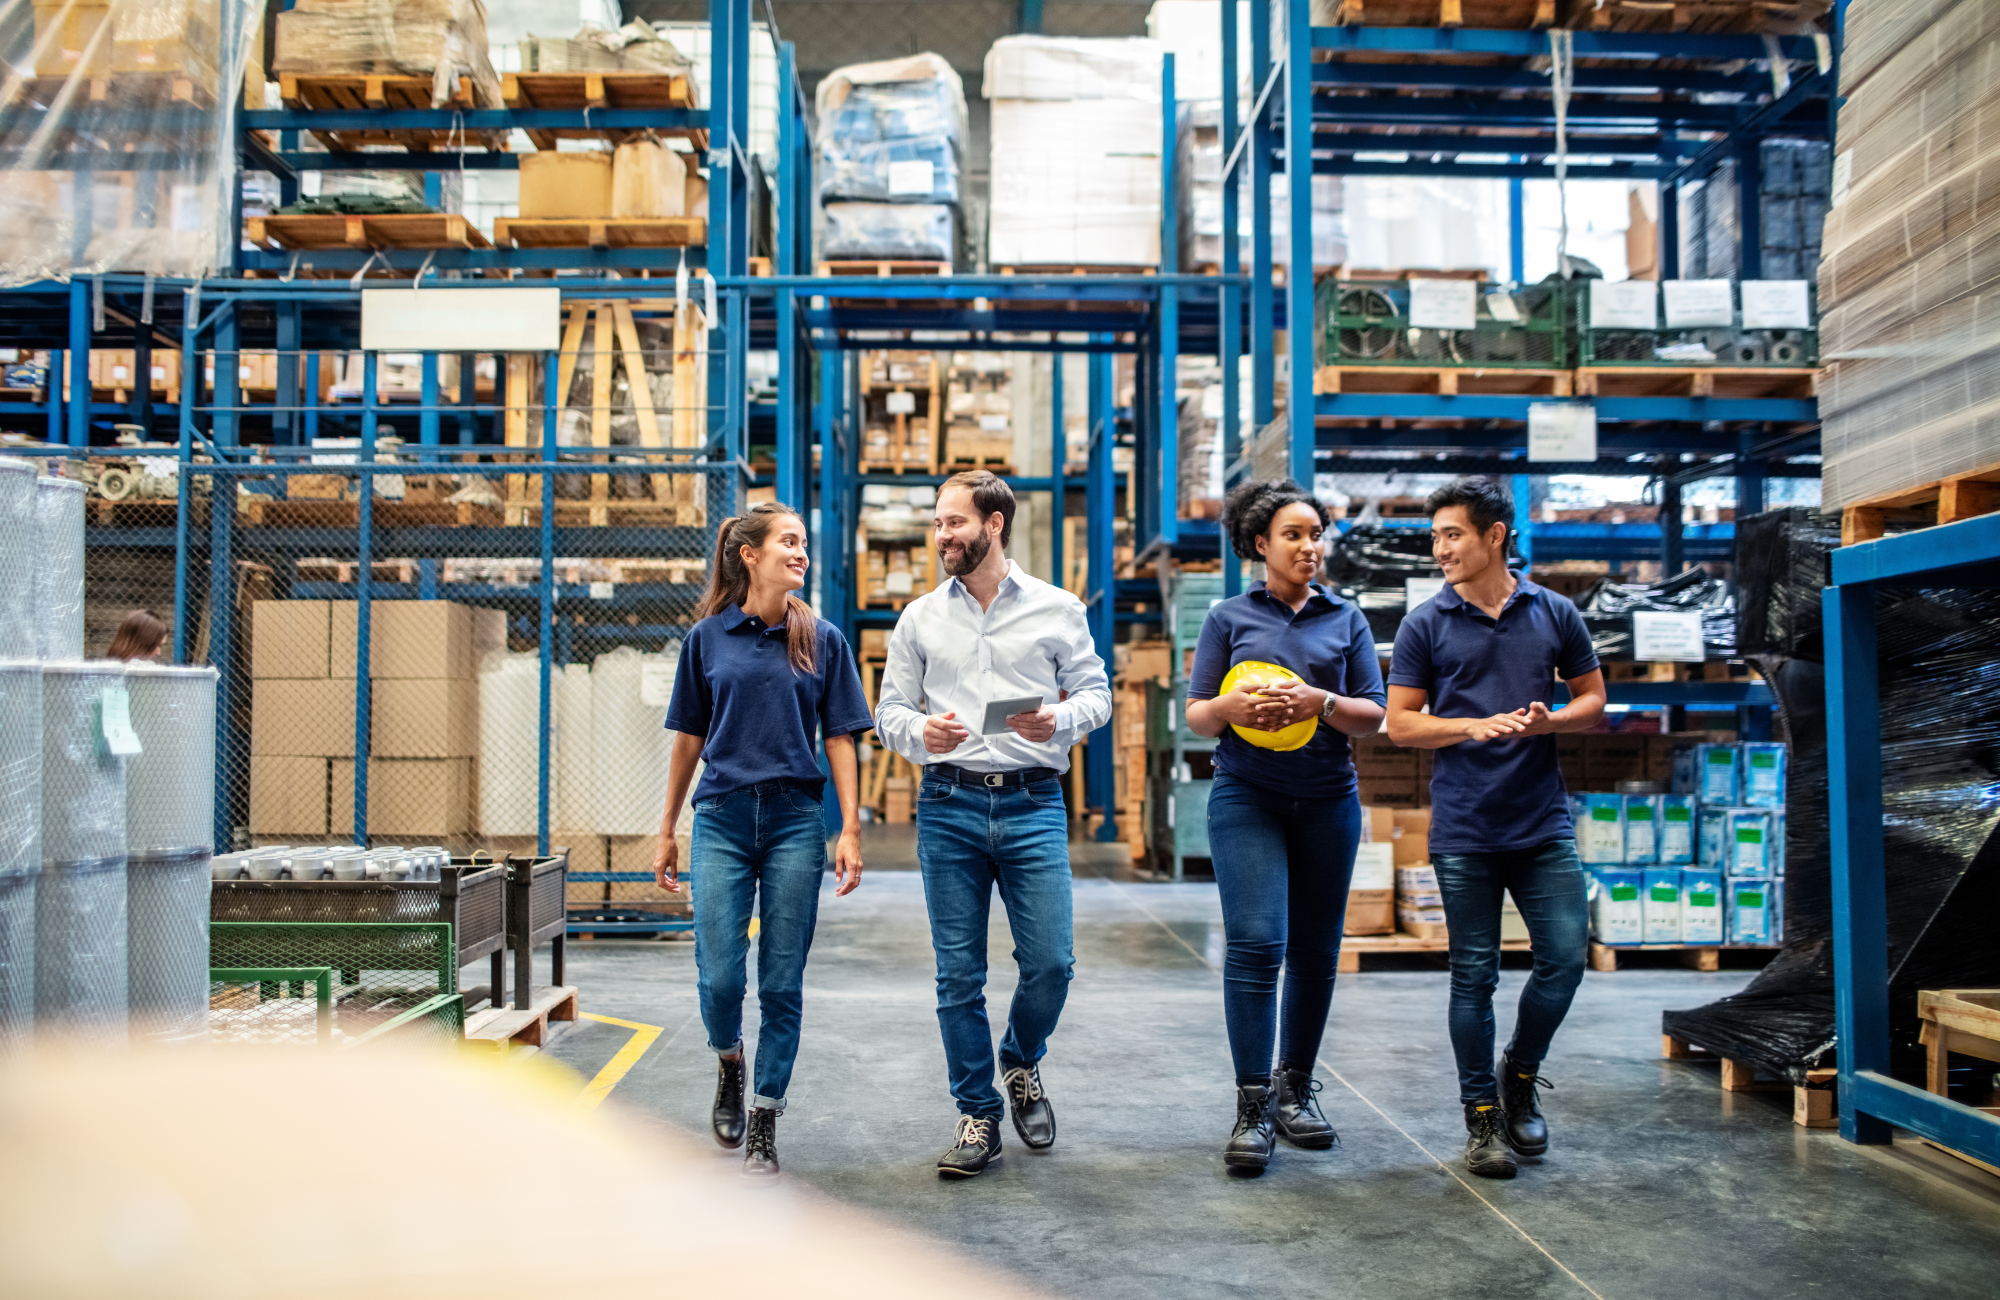 Employees at a warehouse smiling and walking